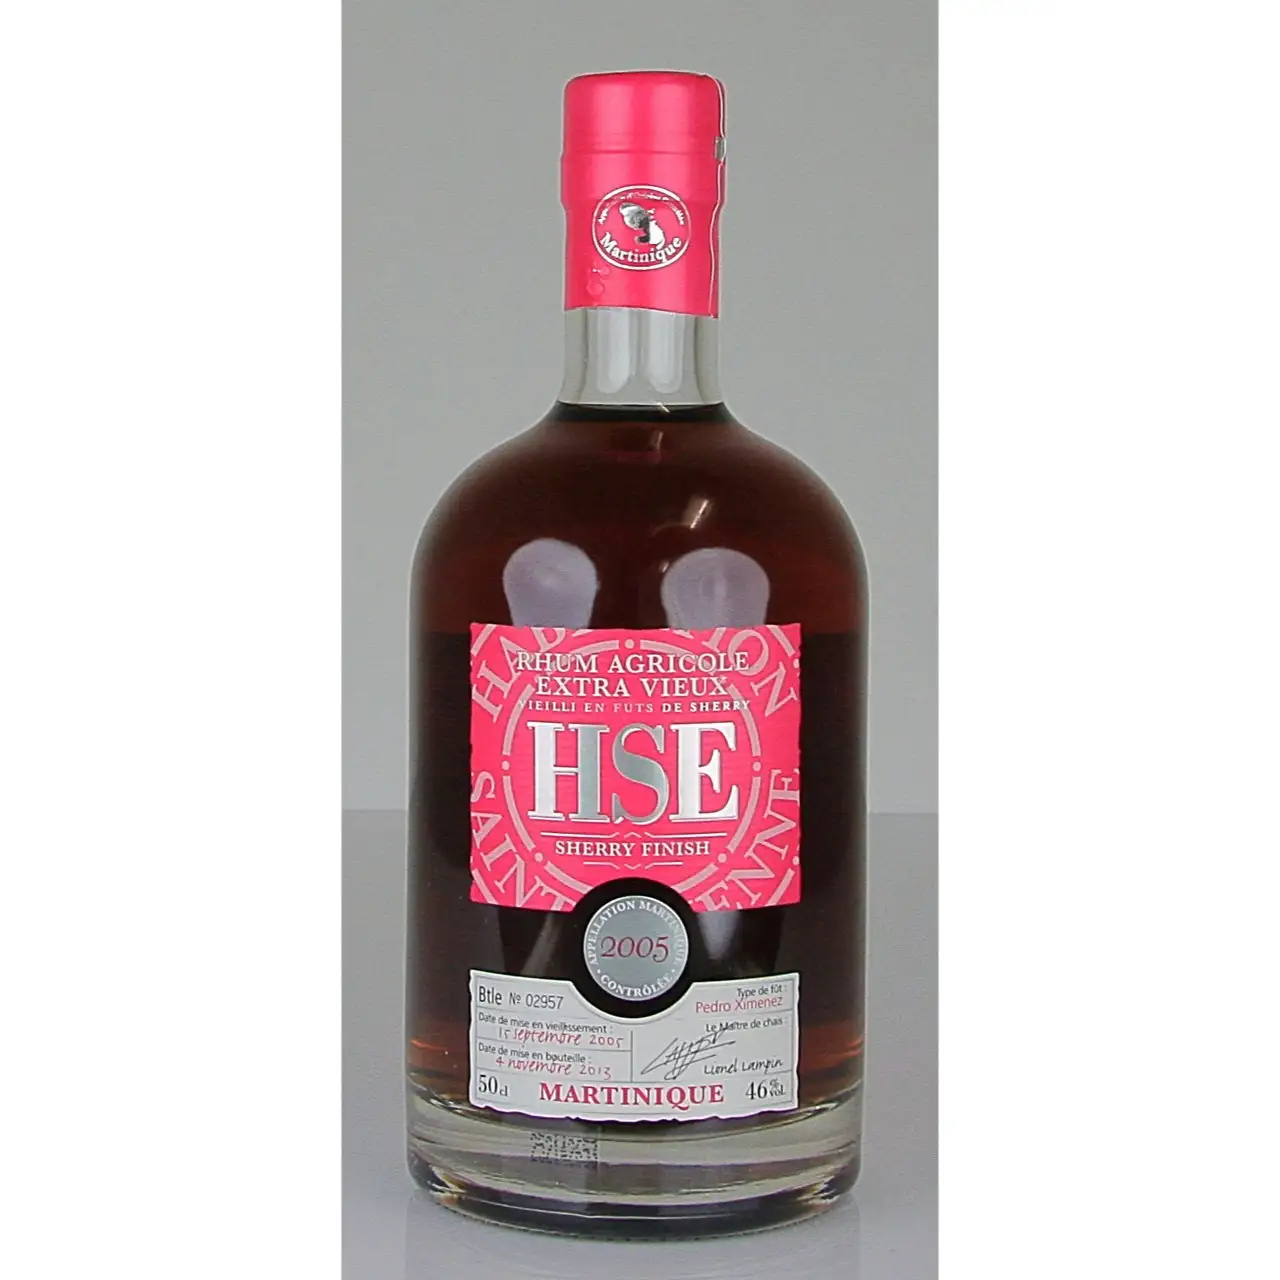 Image of the front of the bottle of the rum HSE Sherry Finish